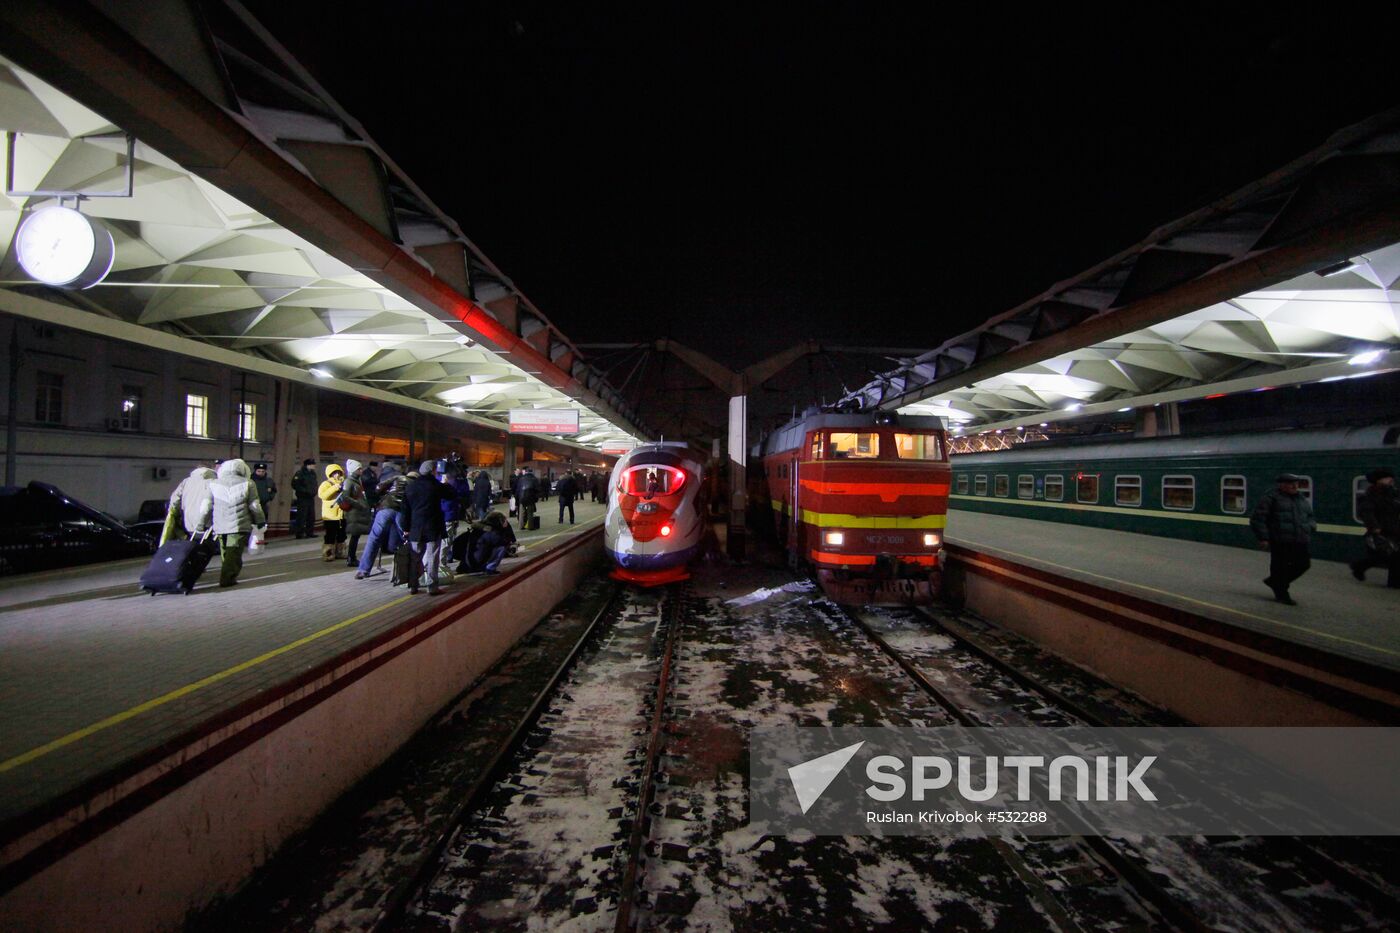 Sapsan high-speed train on its first commercial run